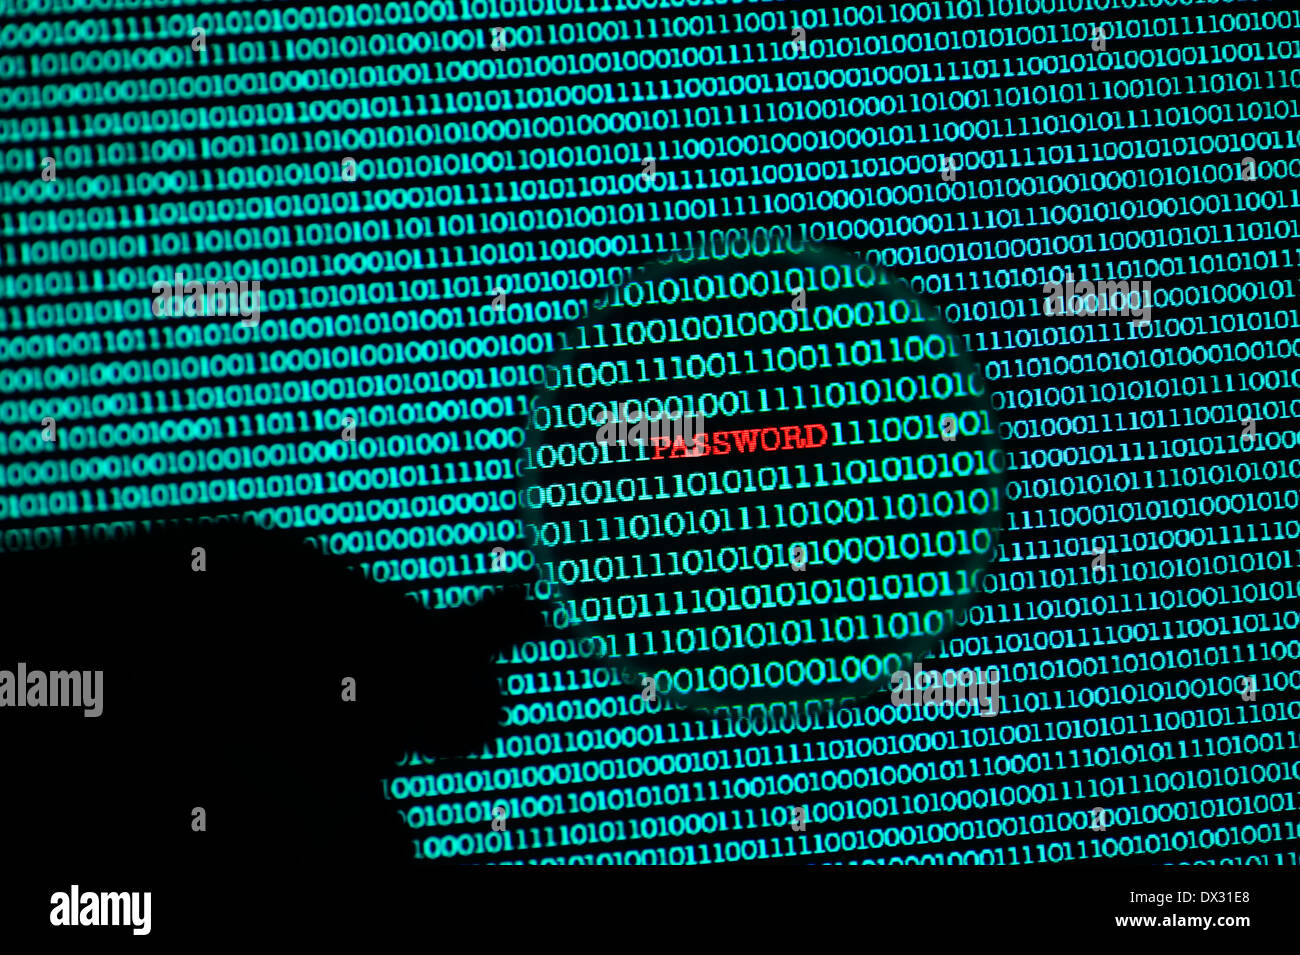 cyber crime password computer security Stock Photo